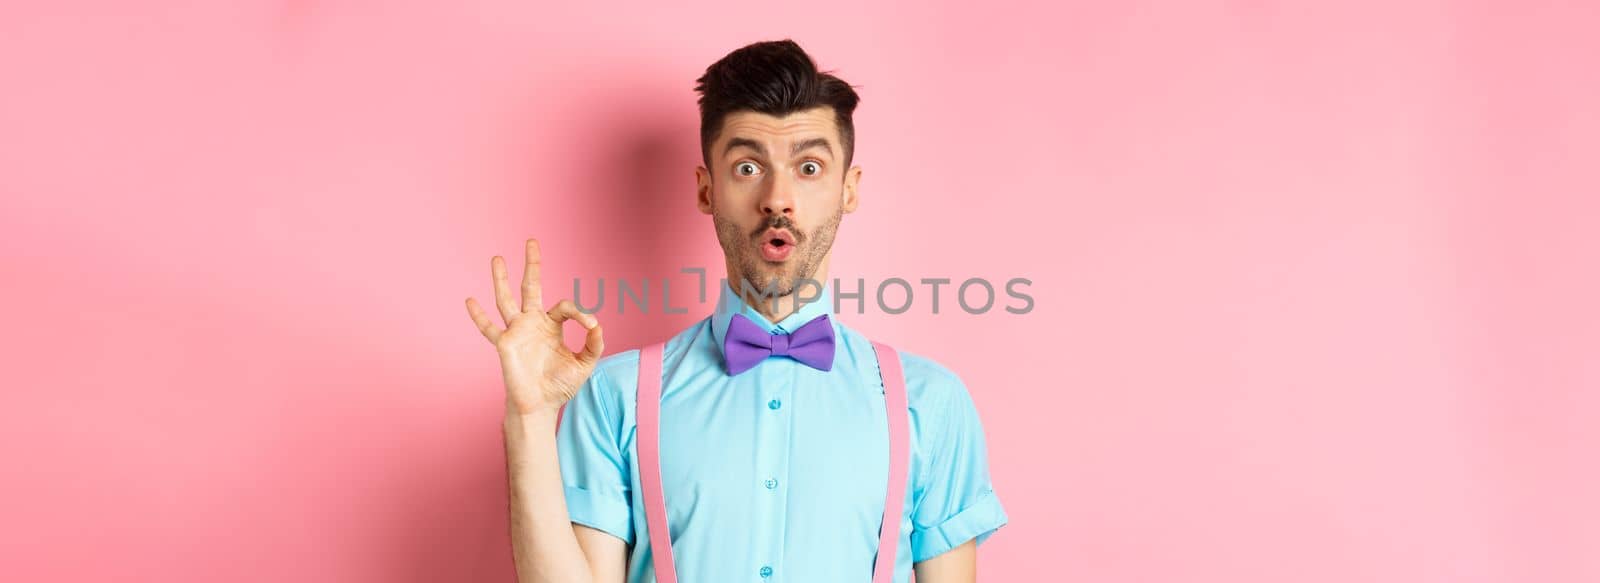 Impressed guy in bow-tie and suspenders saying wow, showing okay gesture with amazement, praise awesome thing, standing over pink background.